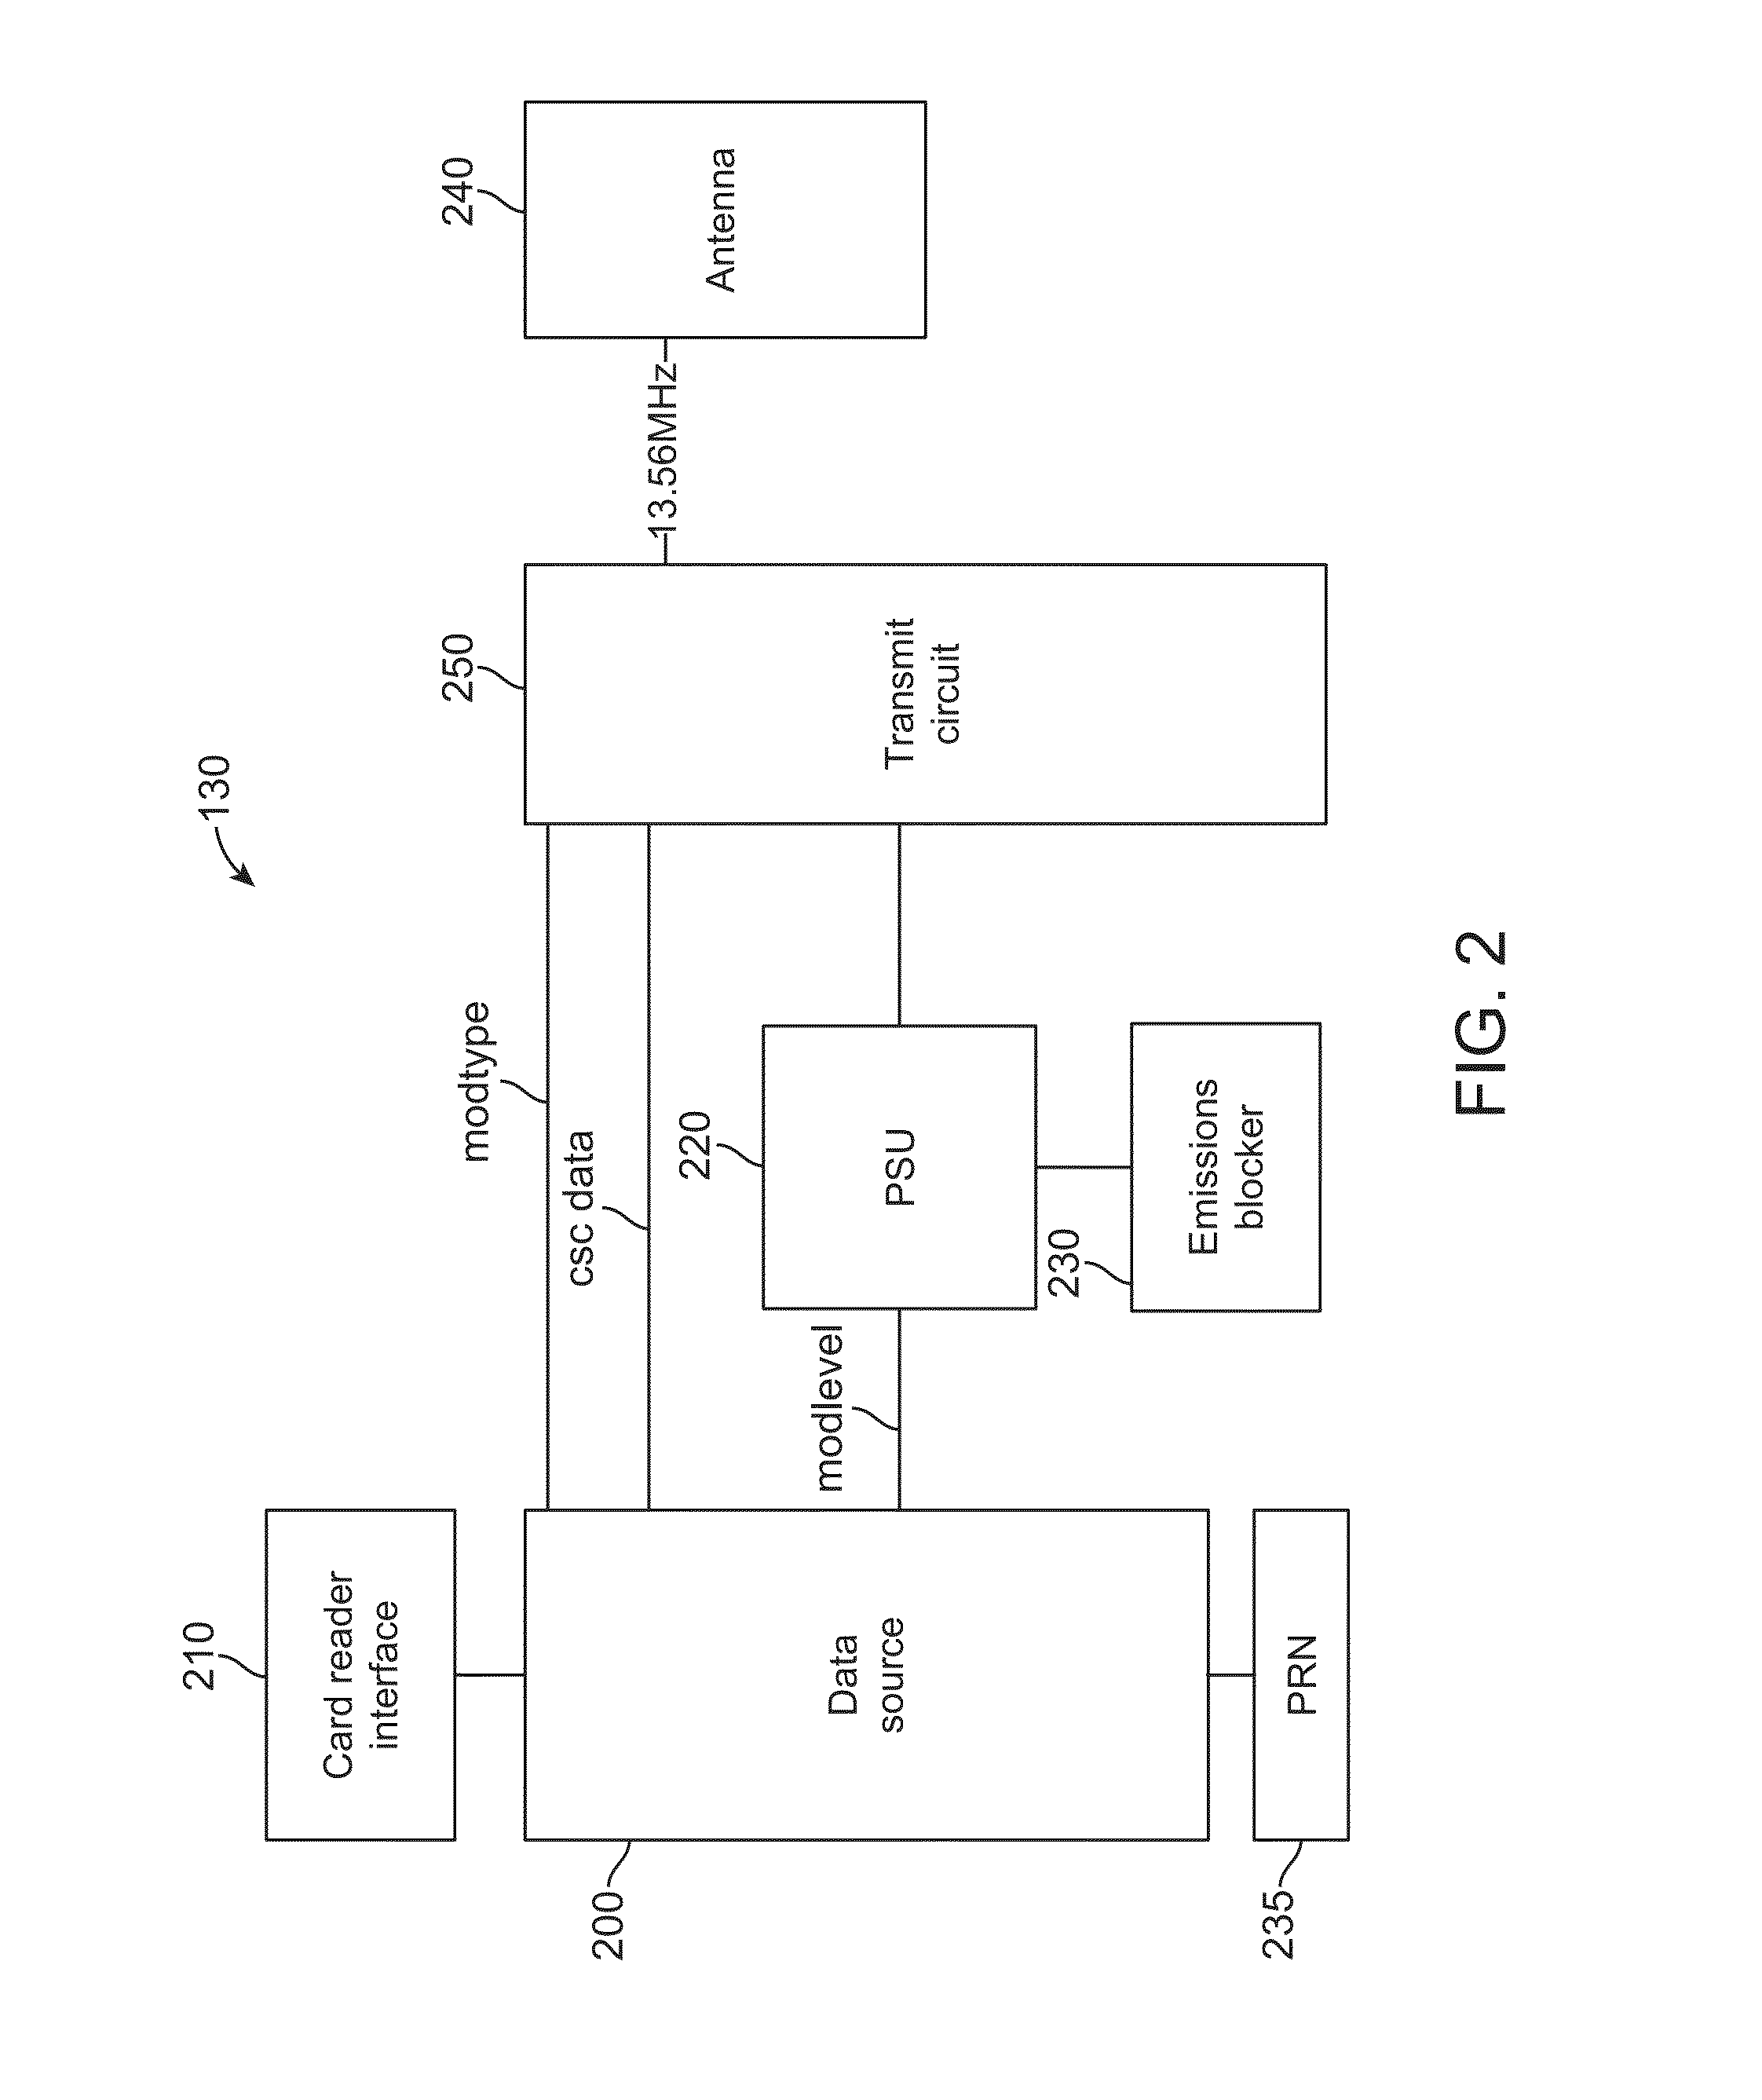 Protection of near-field communication exchanges